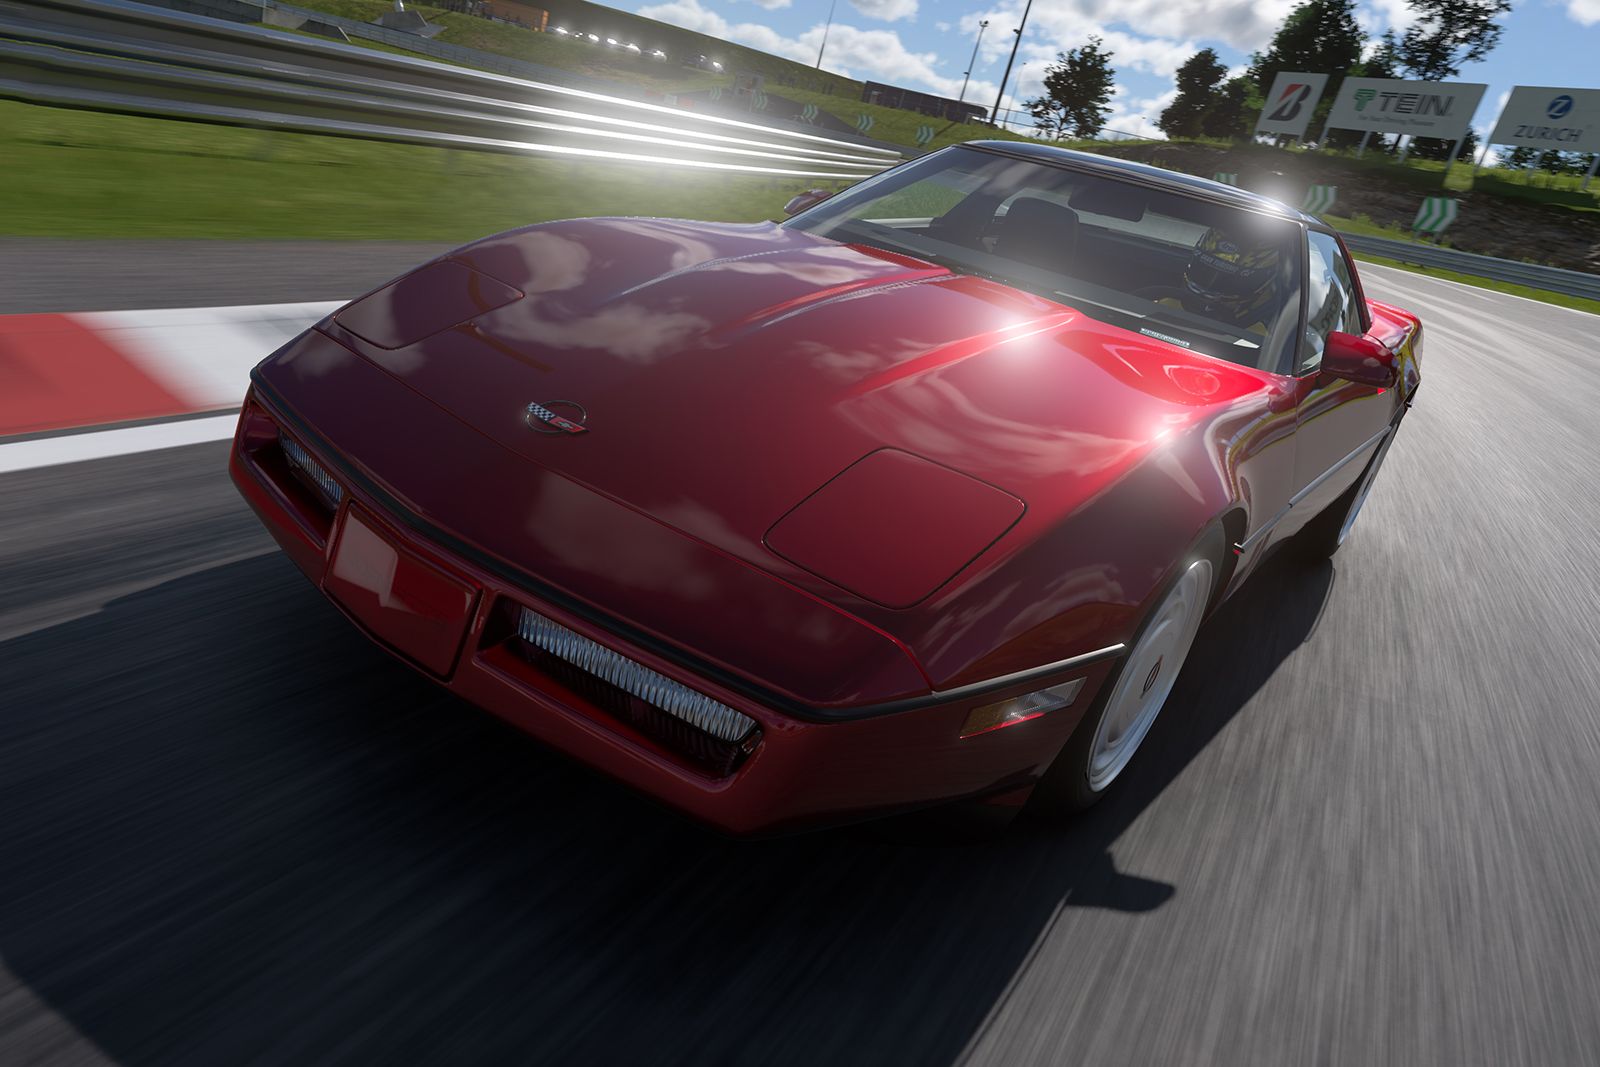 Gran Turismo 7 tips and tricks: Get started with this detailed racing game photo 9